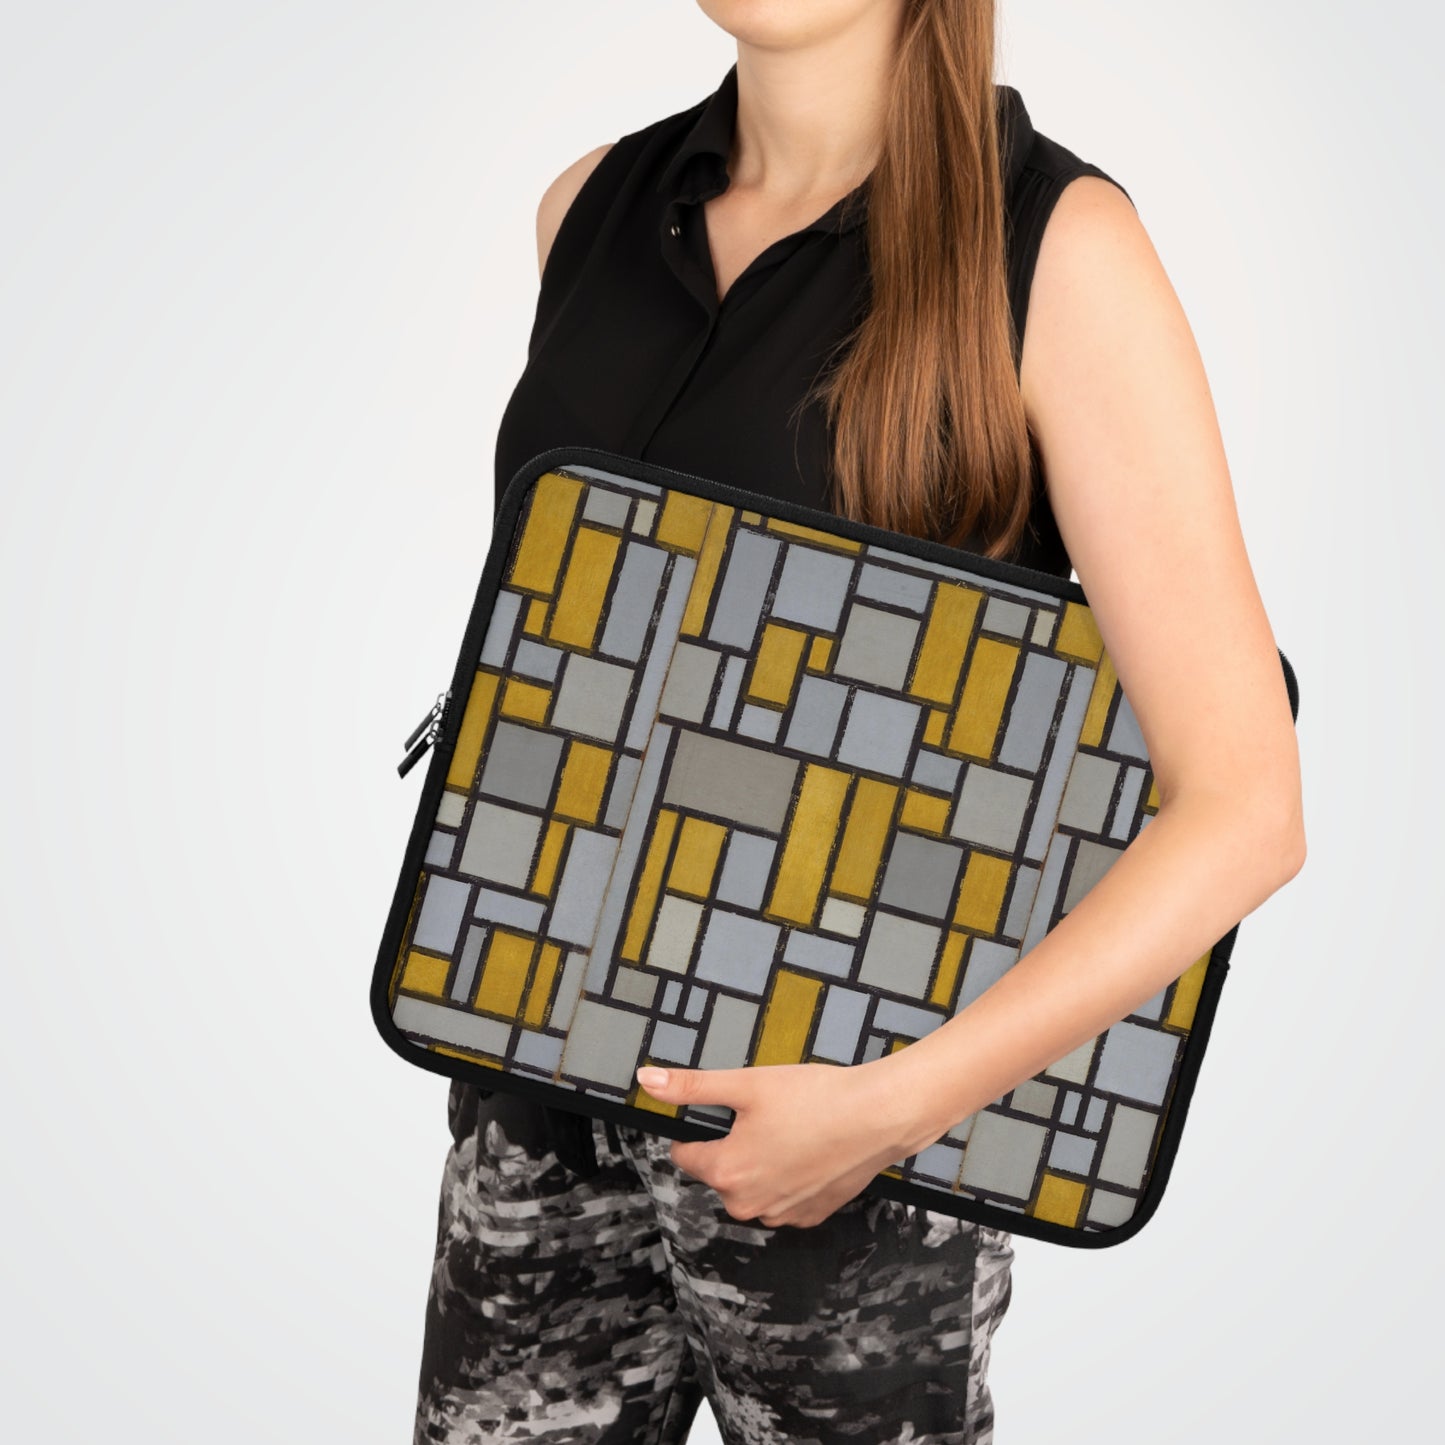 PIET MONDRIAN - COMPOSITION WITH GRID No. 1 - LAPTOP SLEEVE